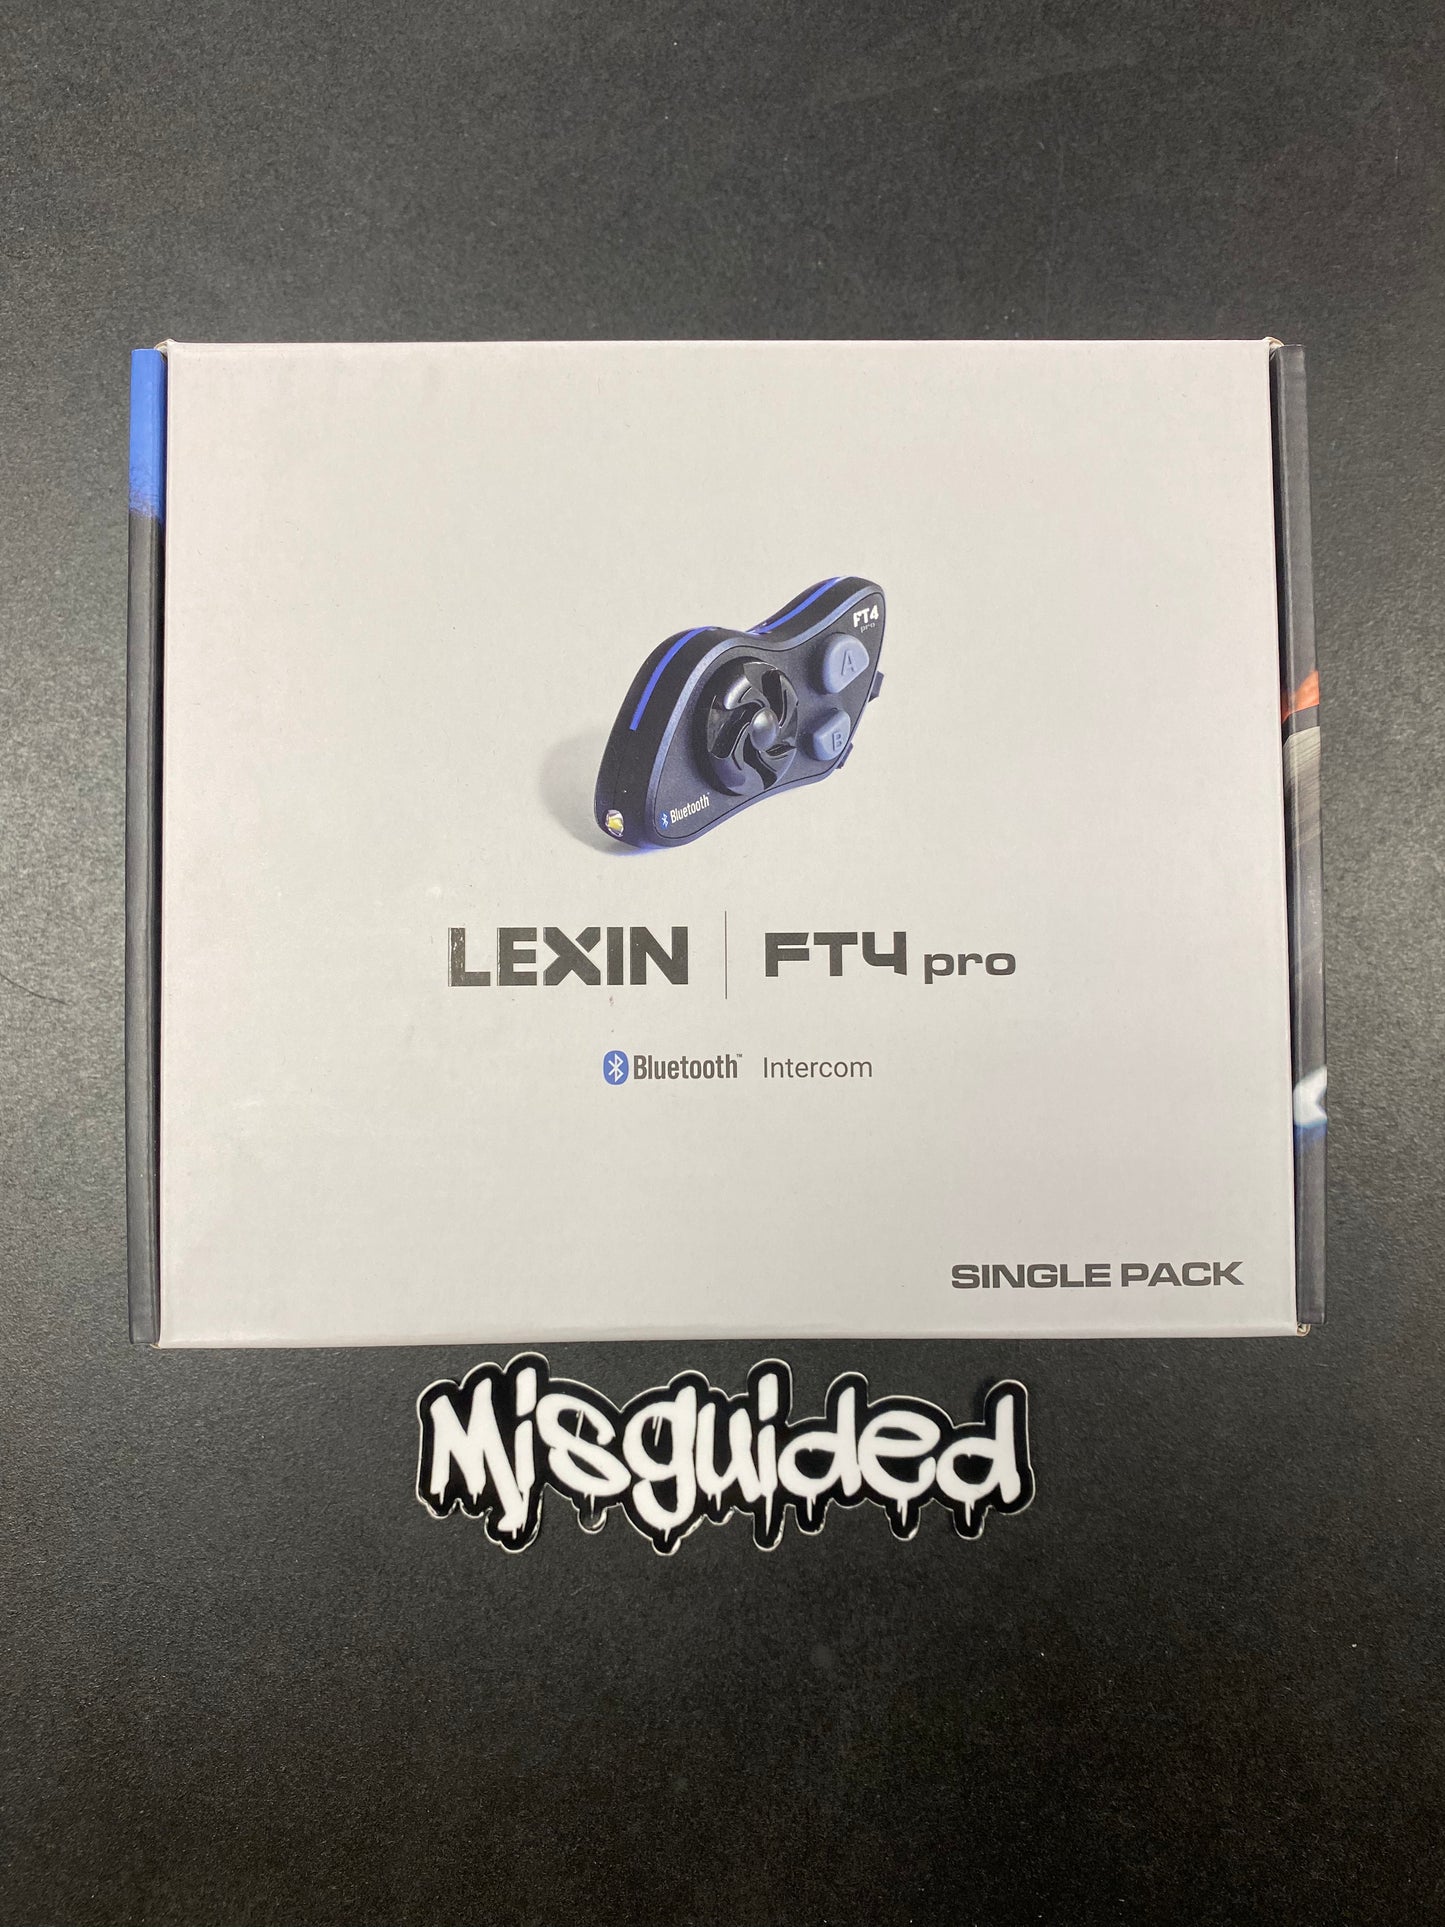 Lexin FT4 Pro Bluetooth Headset Single Pack!